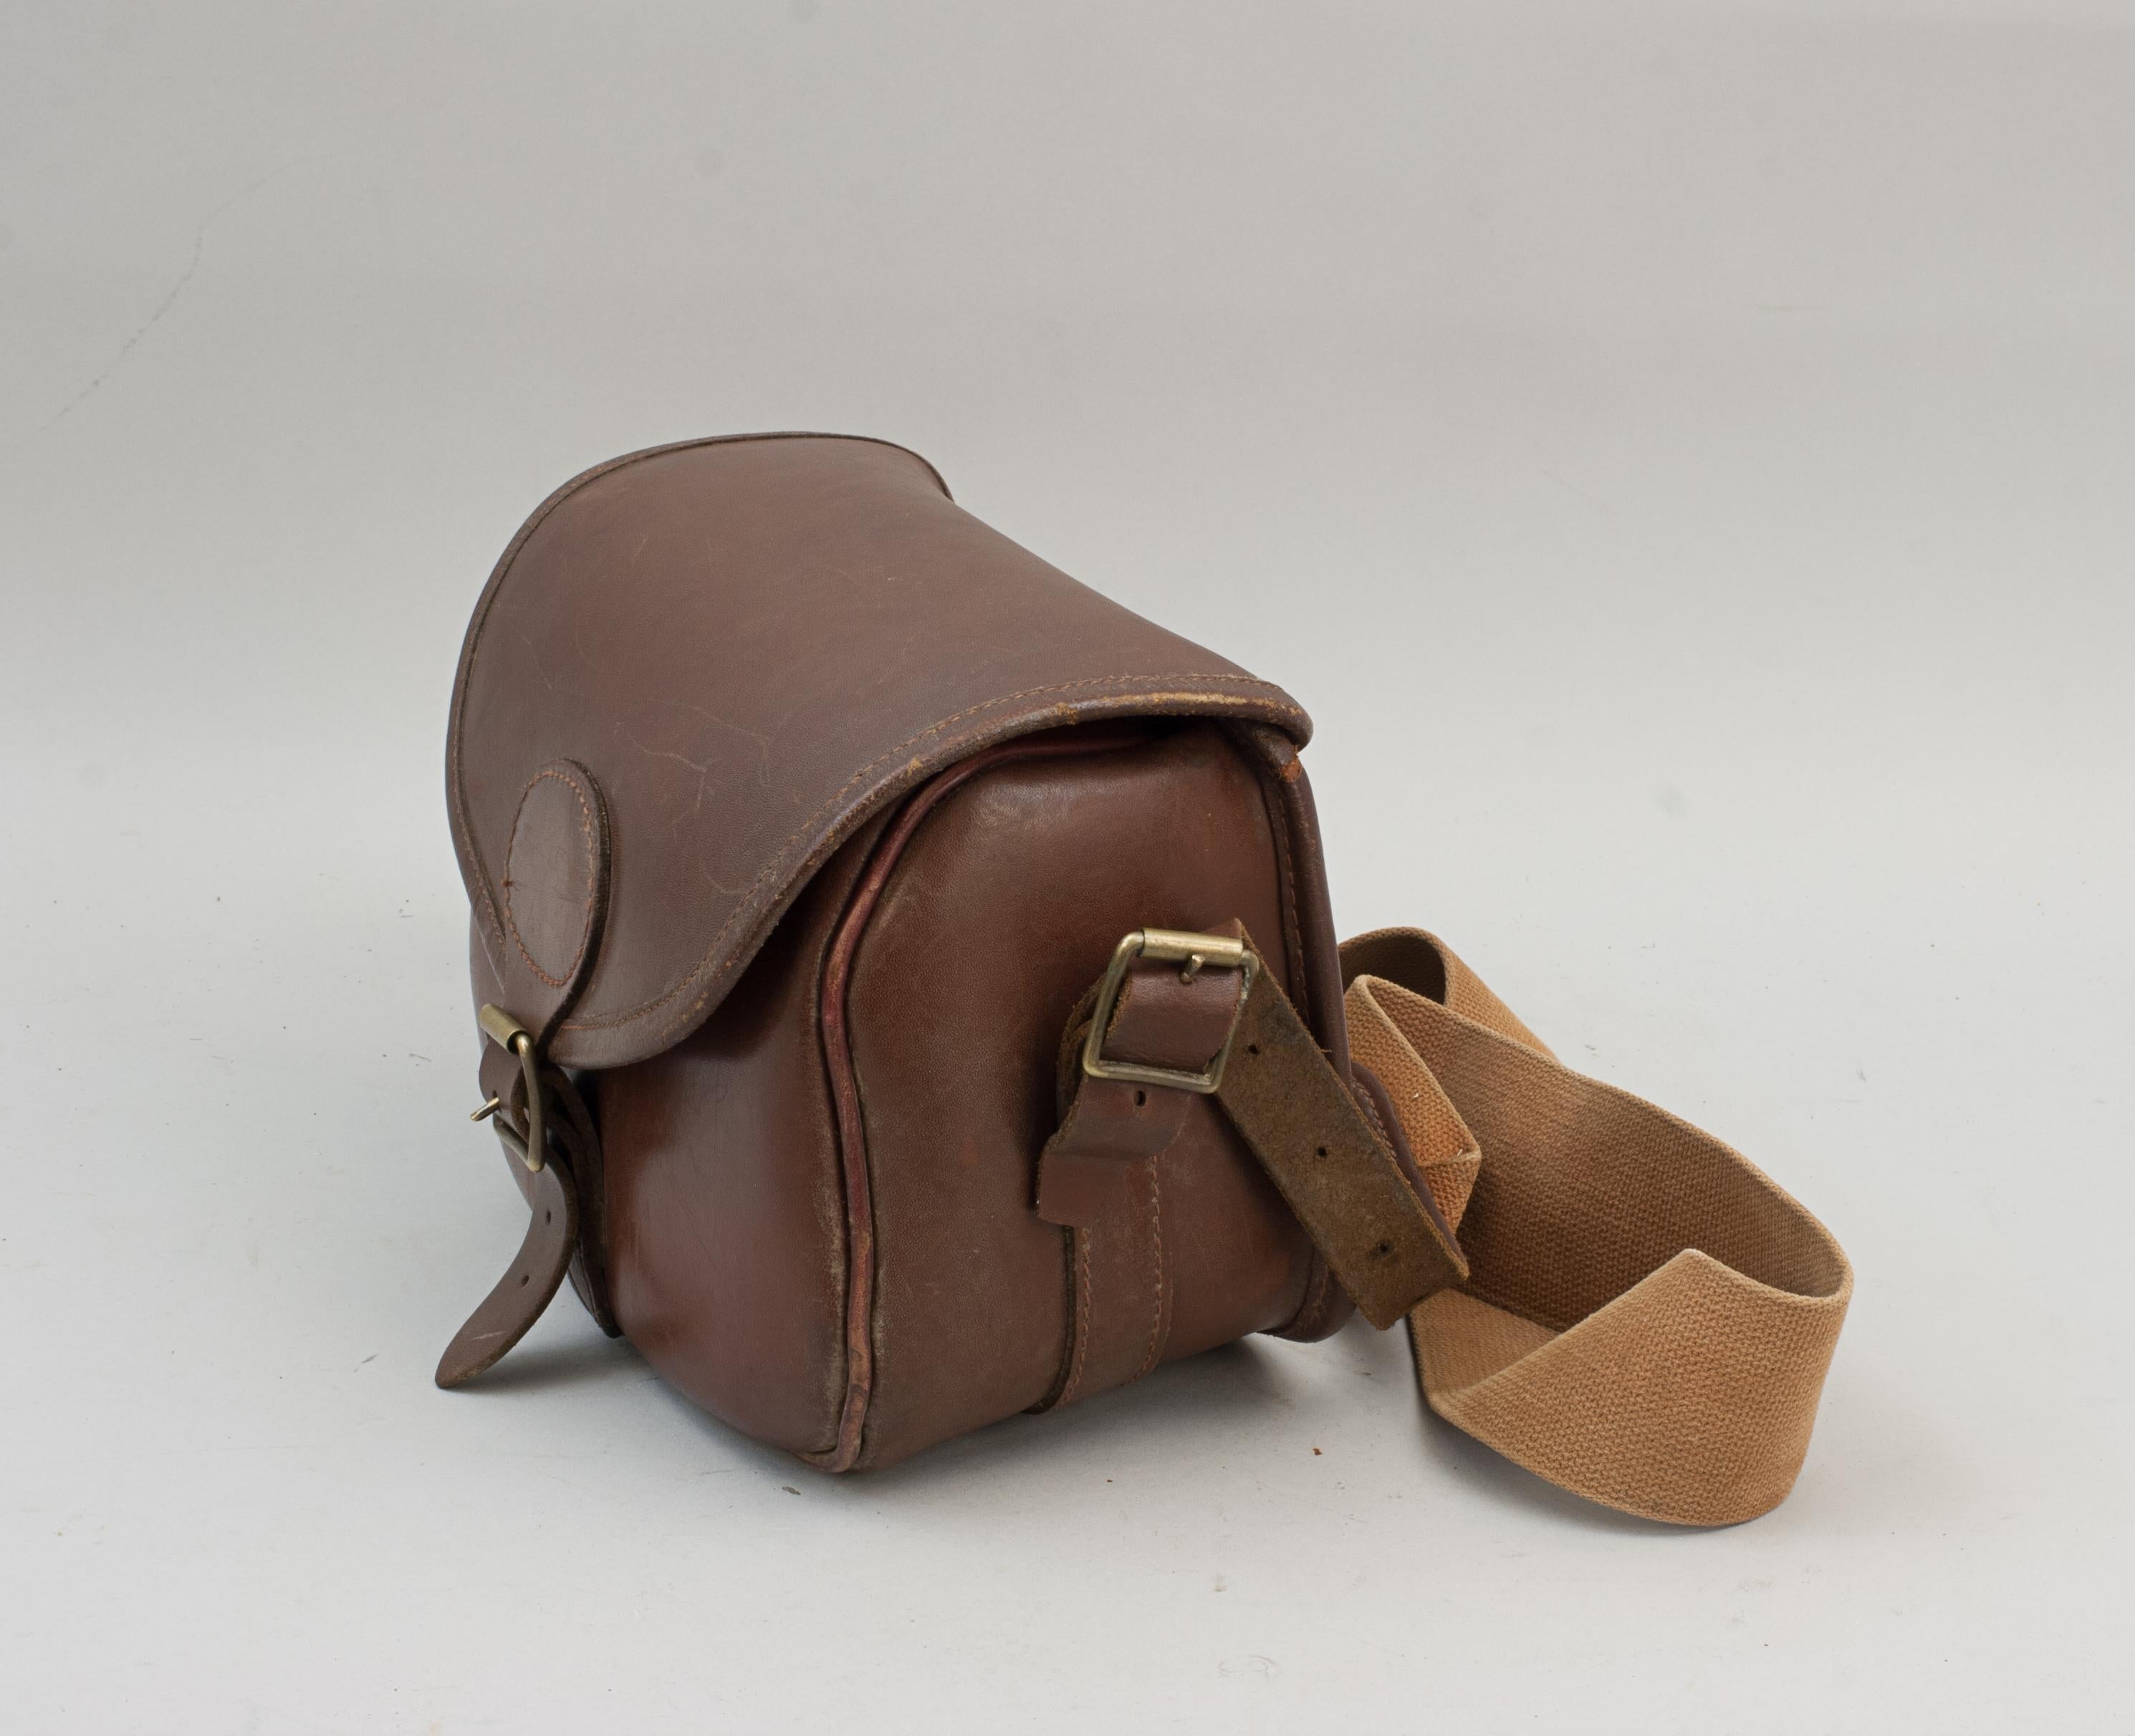 Leather Cartridge Bag In Good Condition For Sale In Oxfordshire, GB